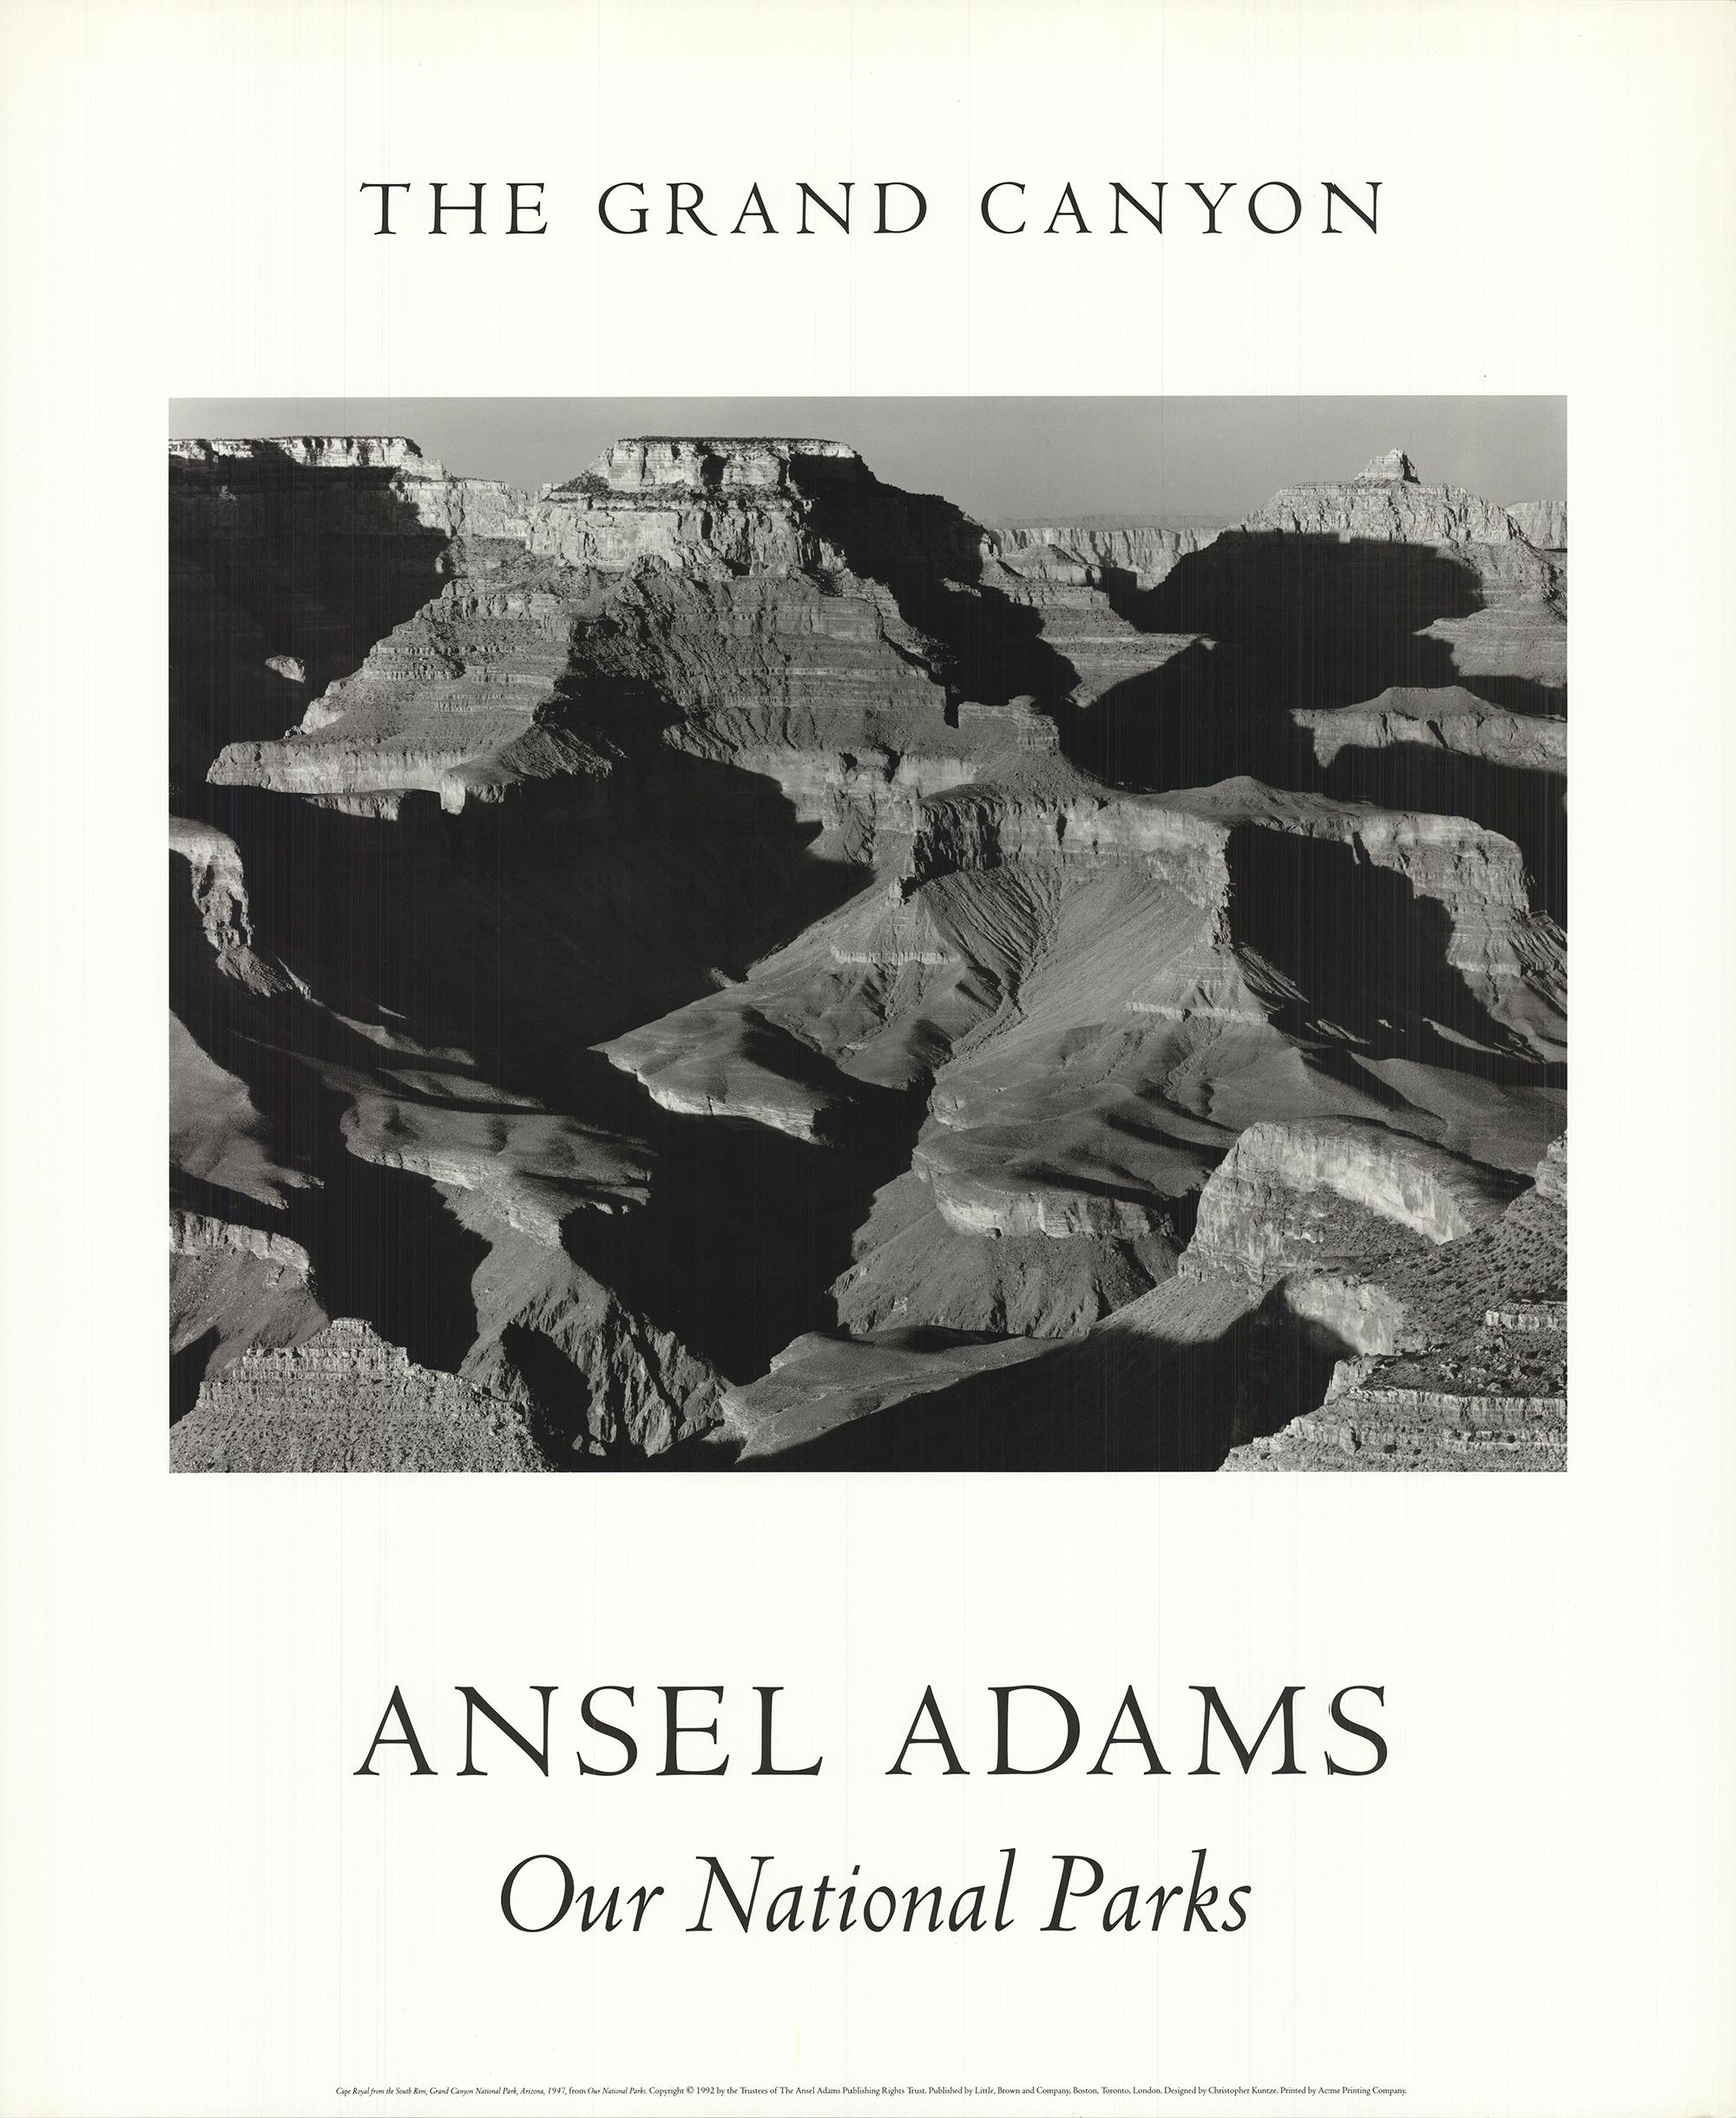 ANSEL ADAMS Cape Royal from the South Rim, Grand Canyon National Park Poster - Print by Ansel Adams